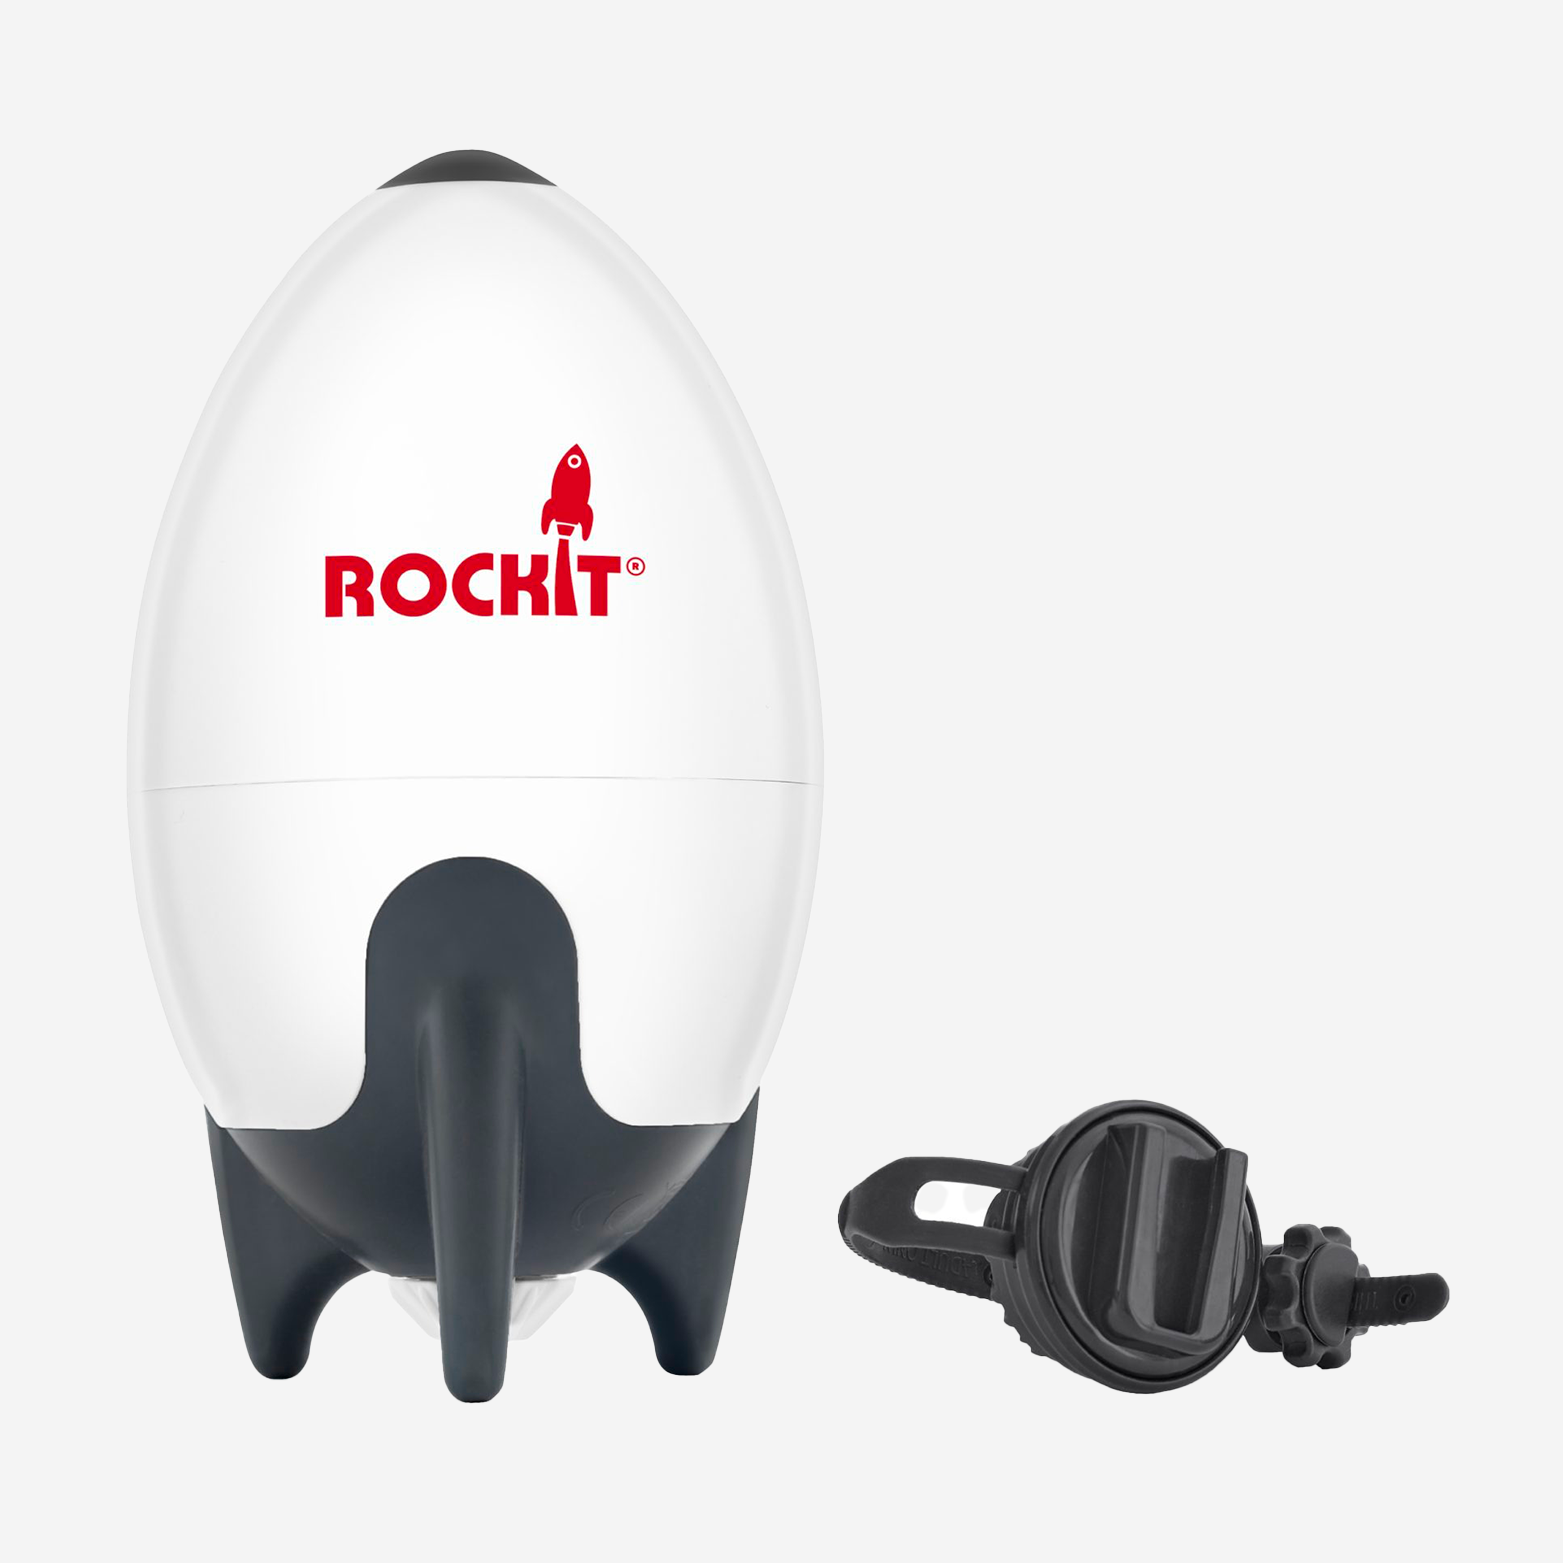 THE ROCKIT ROCKER (rechargeable version) – THE SALTY SEAHORSE CURAÇAO